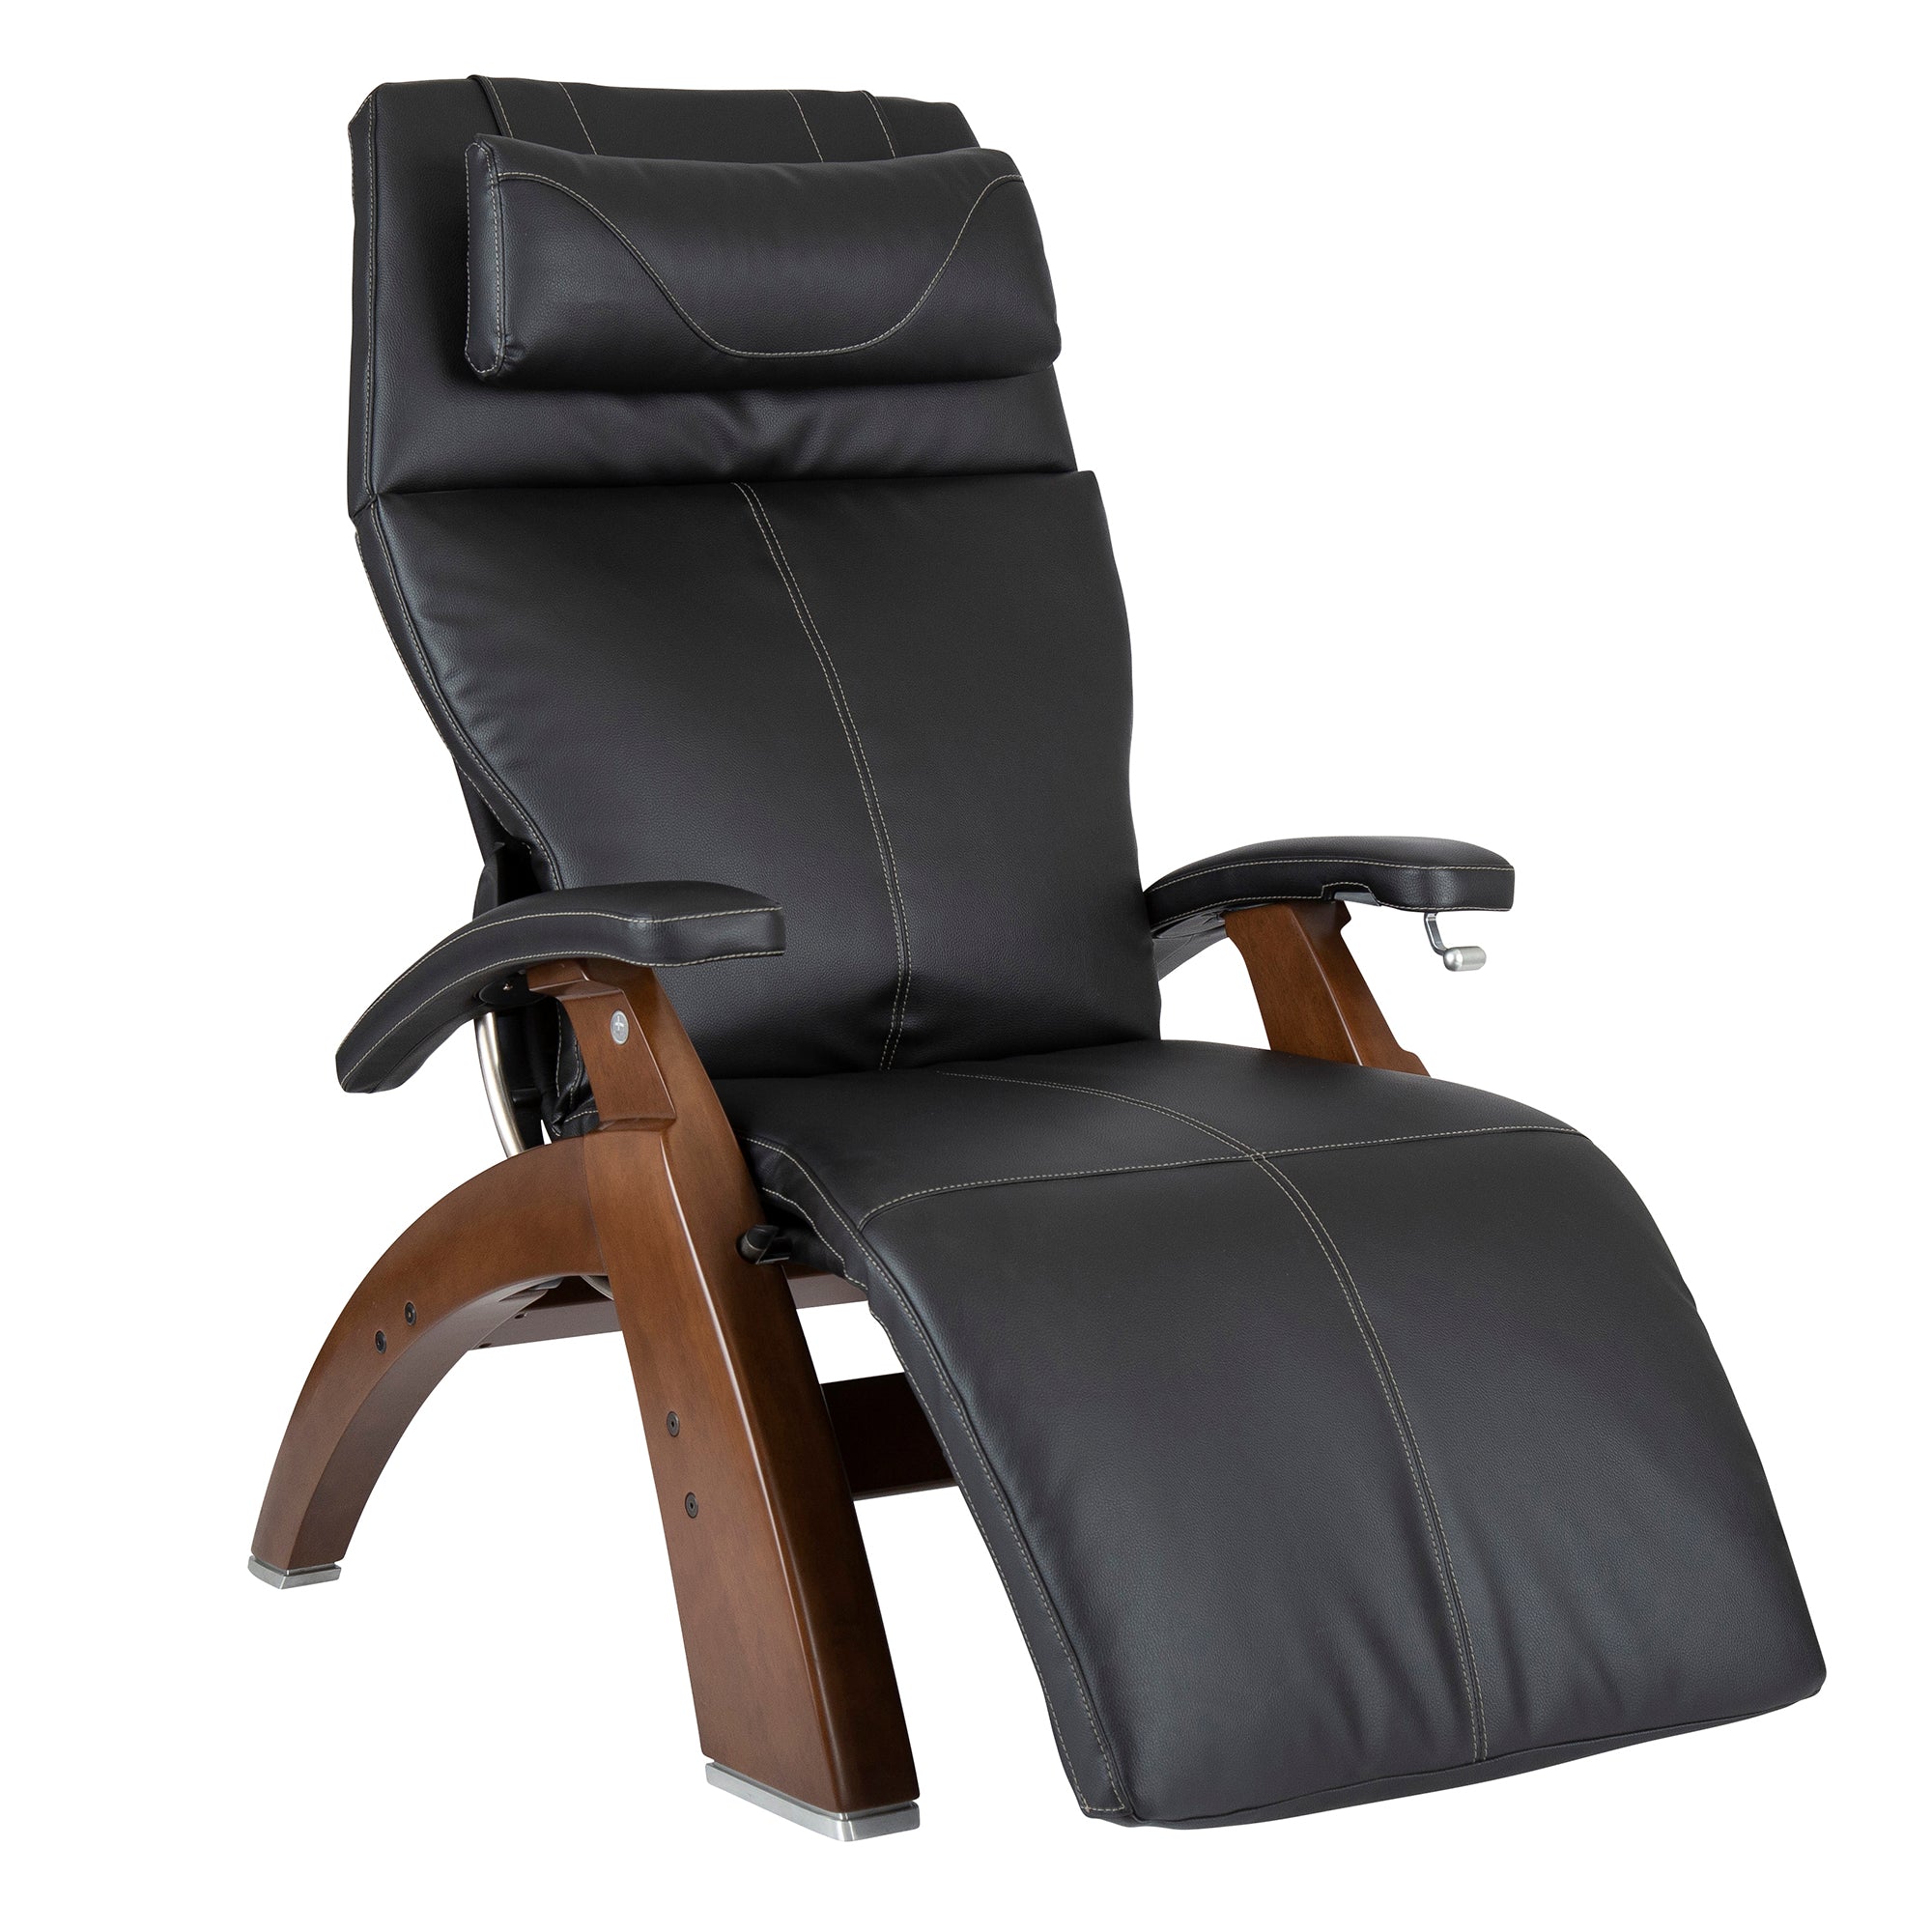 Human TouchArm Chairs, Recliners & Sleeper ChairsHuman Touch Perfect Chair PC-420 Zero Gravity ReclinerBlack SofHyde (Synthetic Leather)Massage Chair Heaven